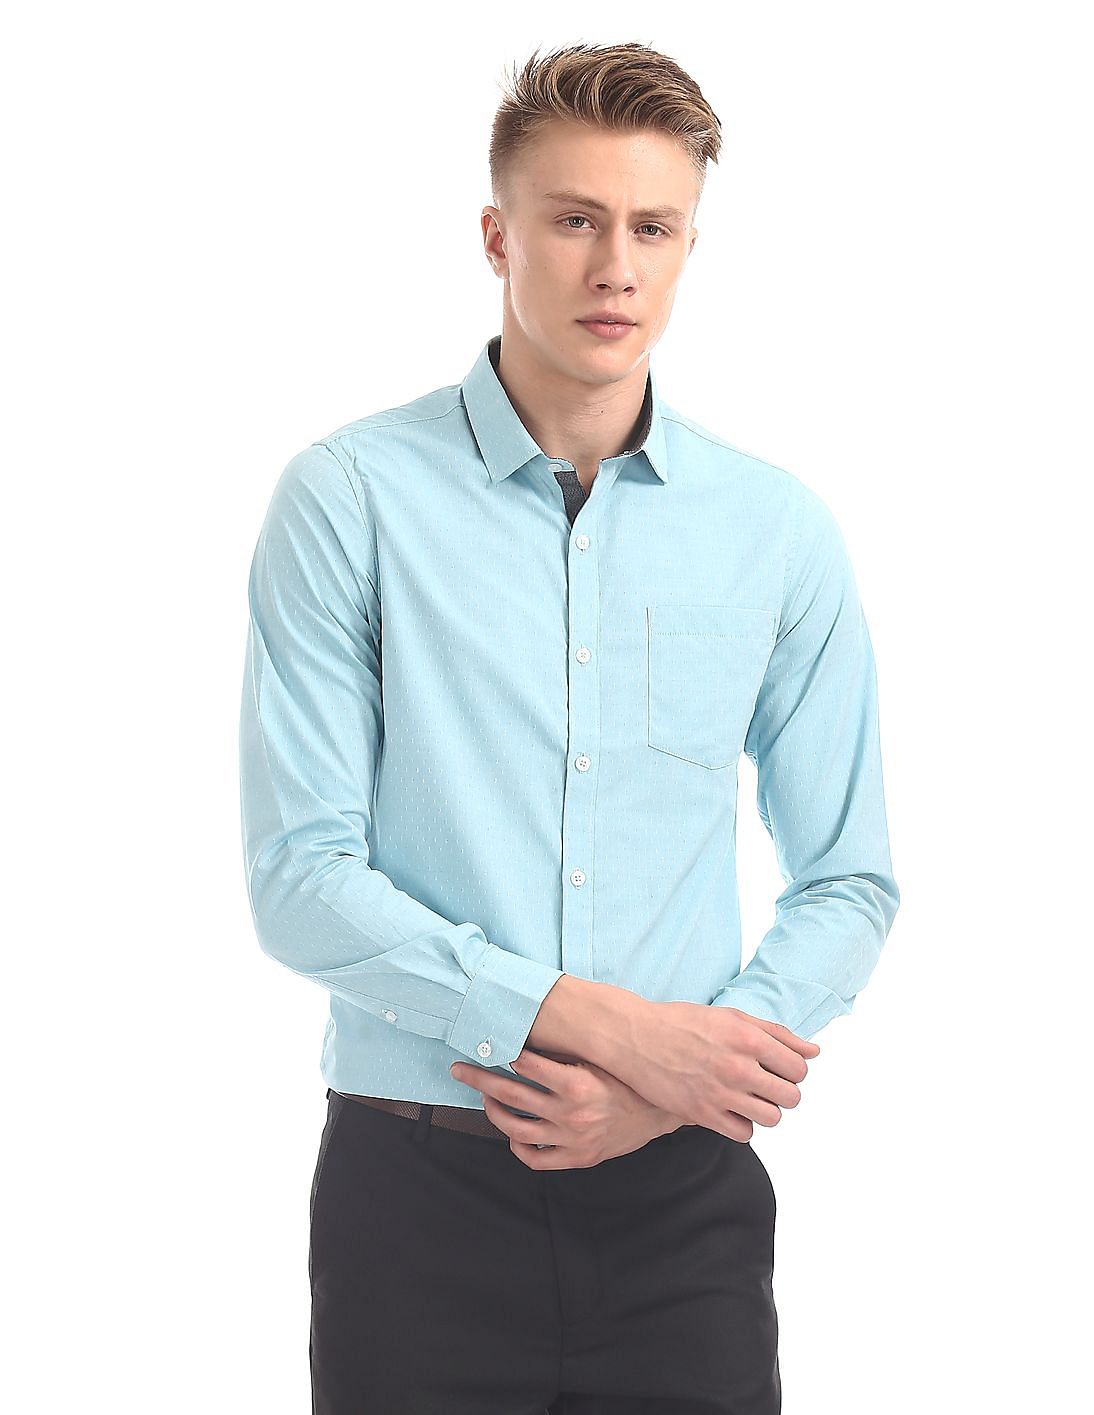 Buy Excalibur by Unlimited Mitered Cuff Patterned Shirt - NNNOW.com